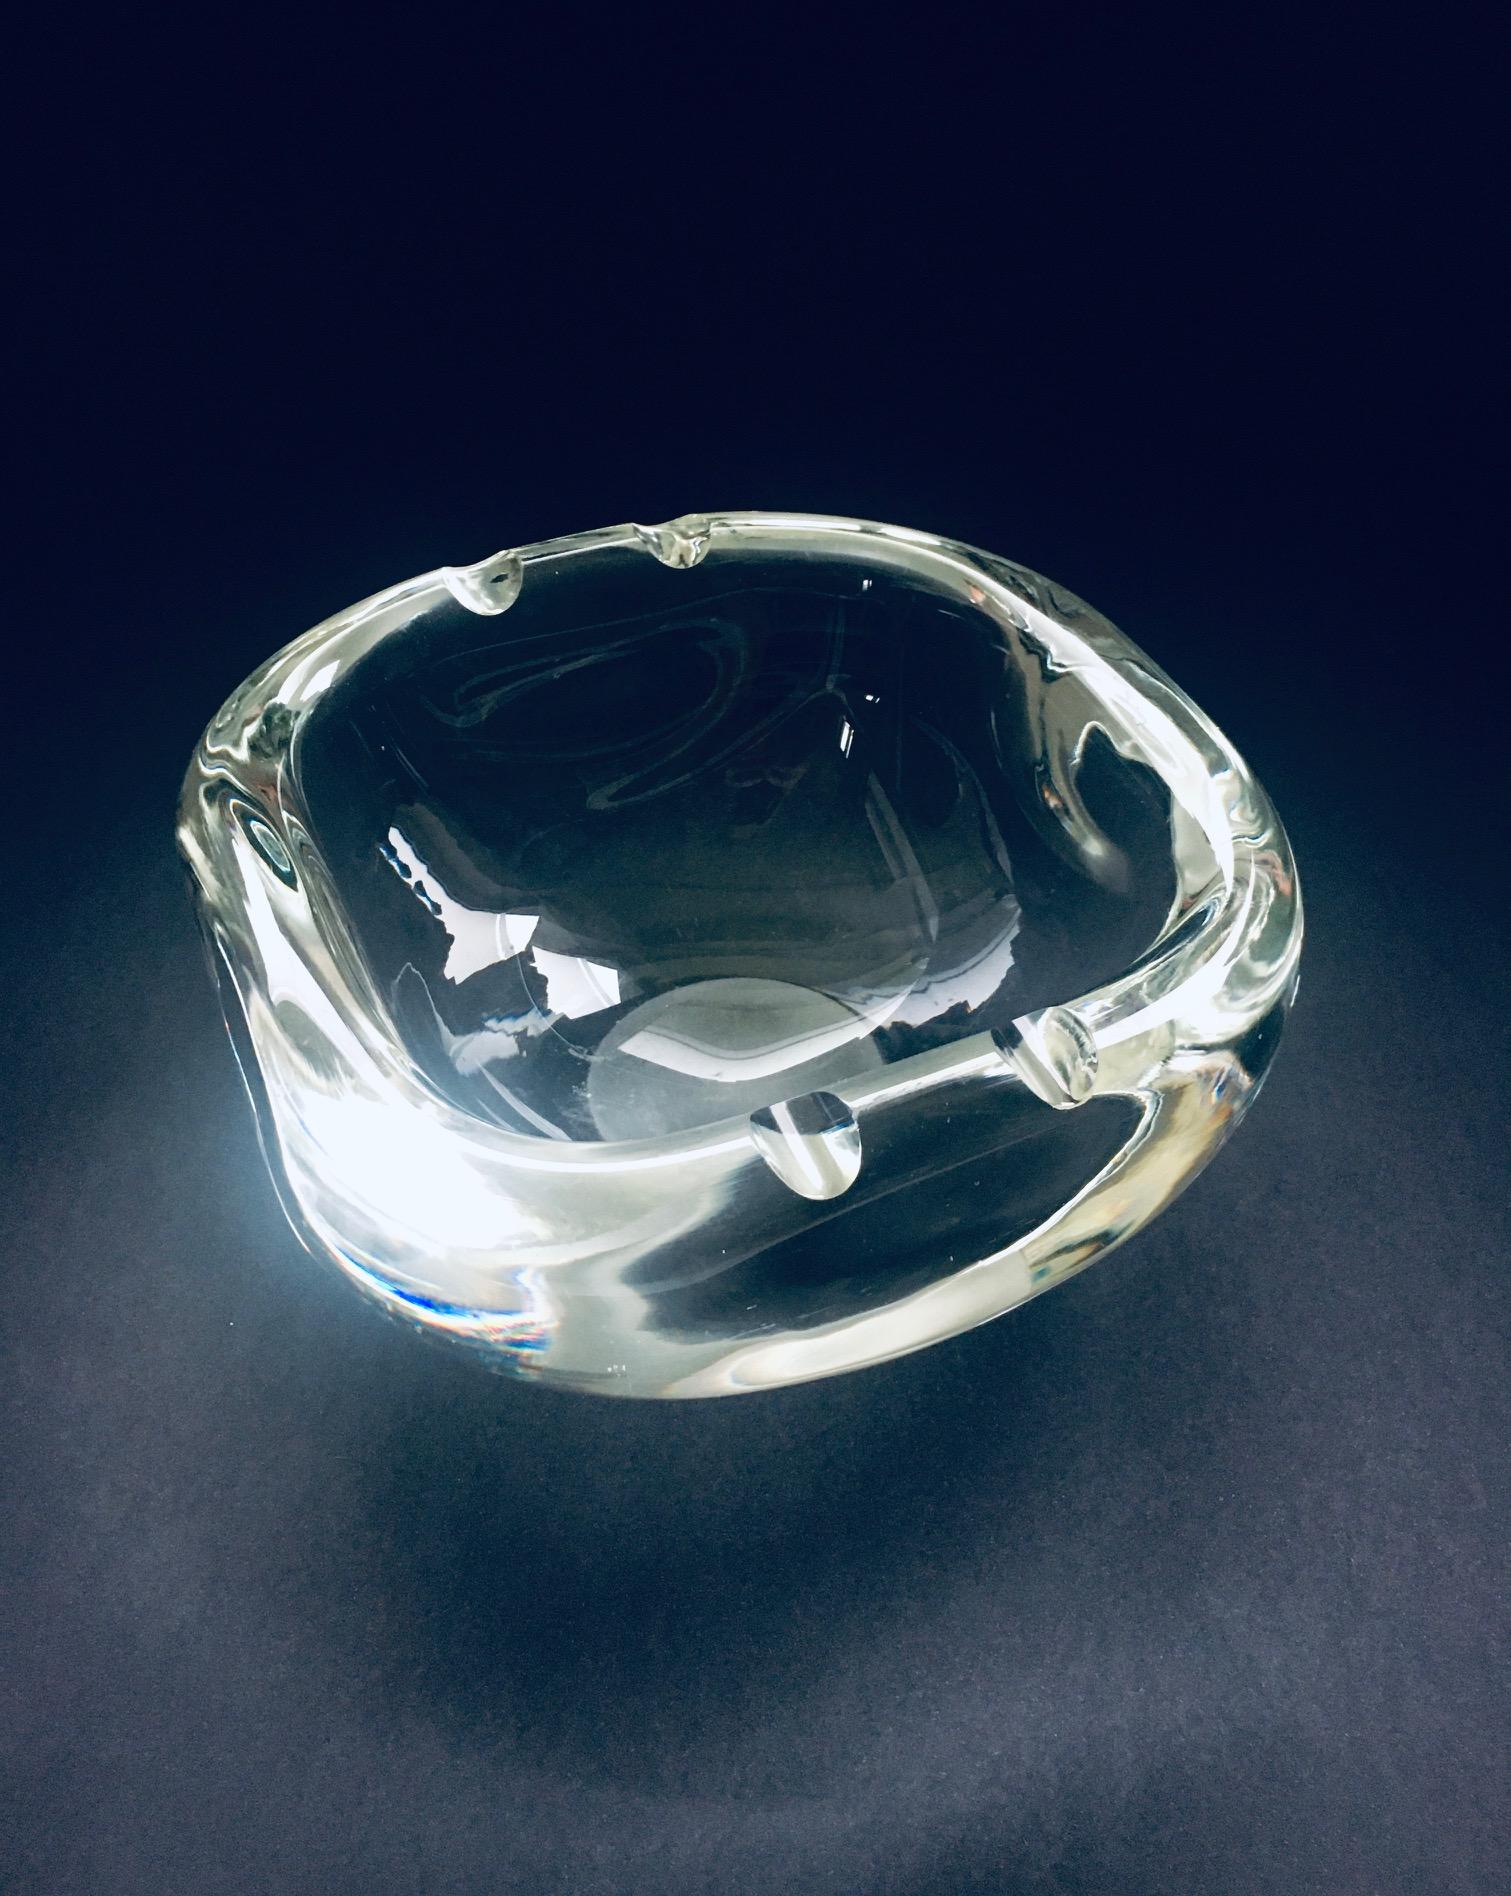 Vintage Art Glass Large Ashtray or Bowl by Barbini, Murano Italy 1960's For Sale 4